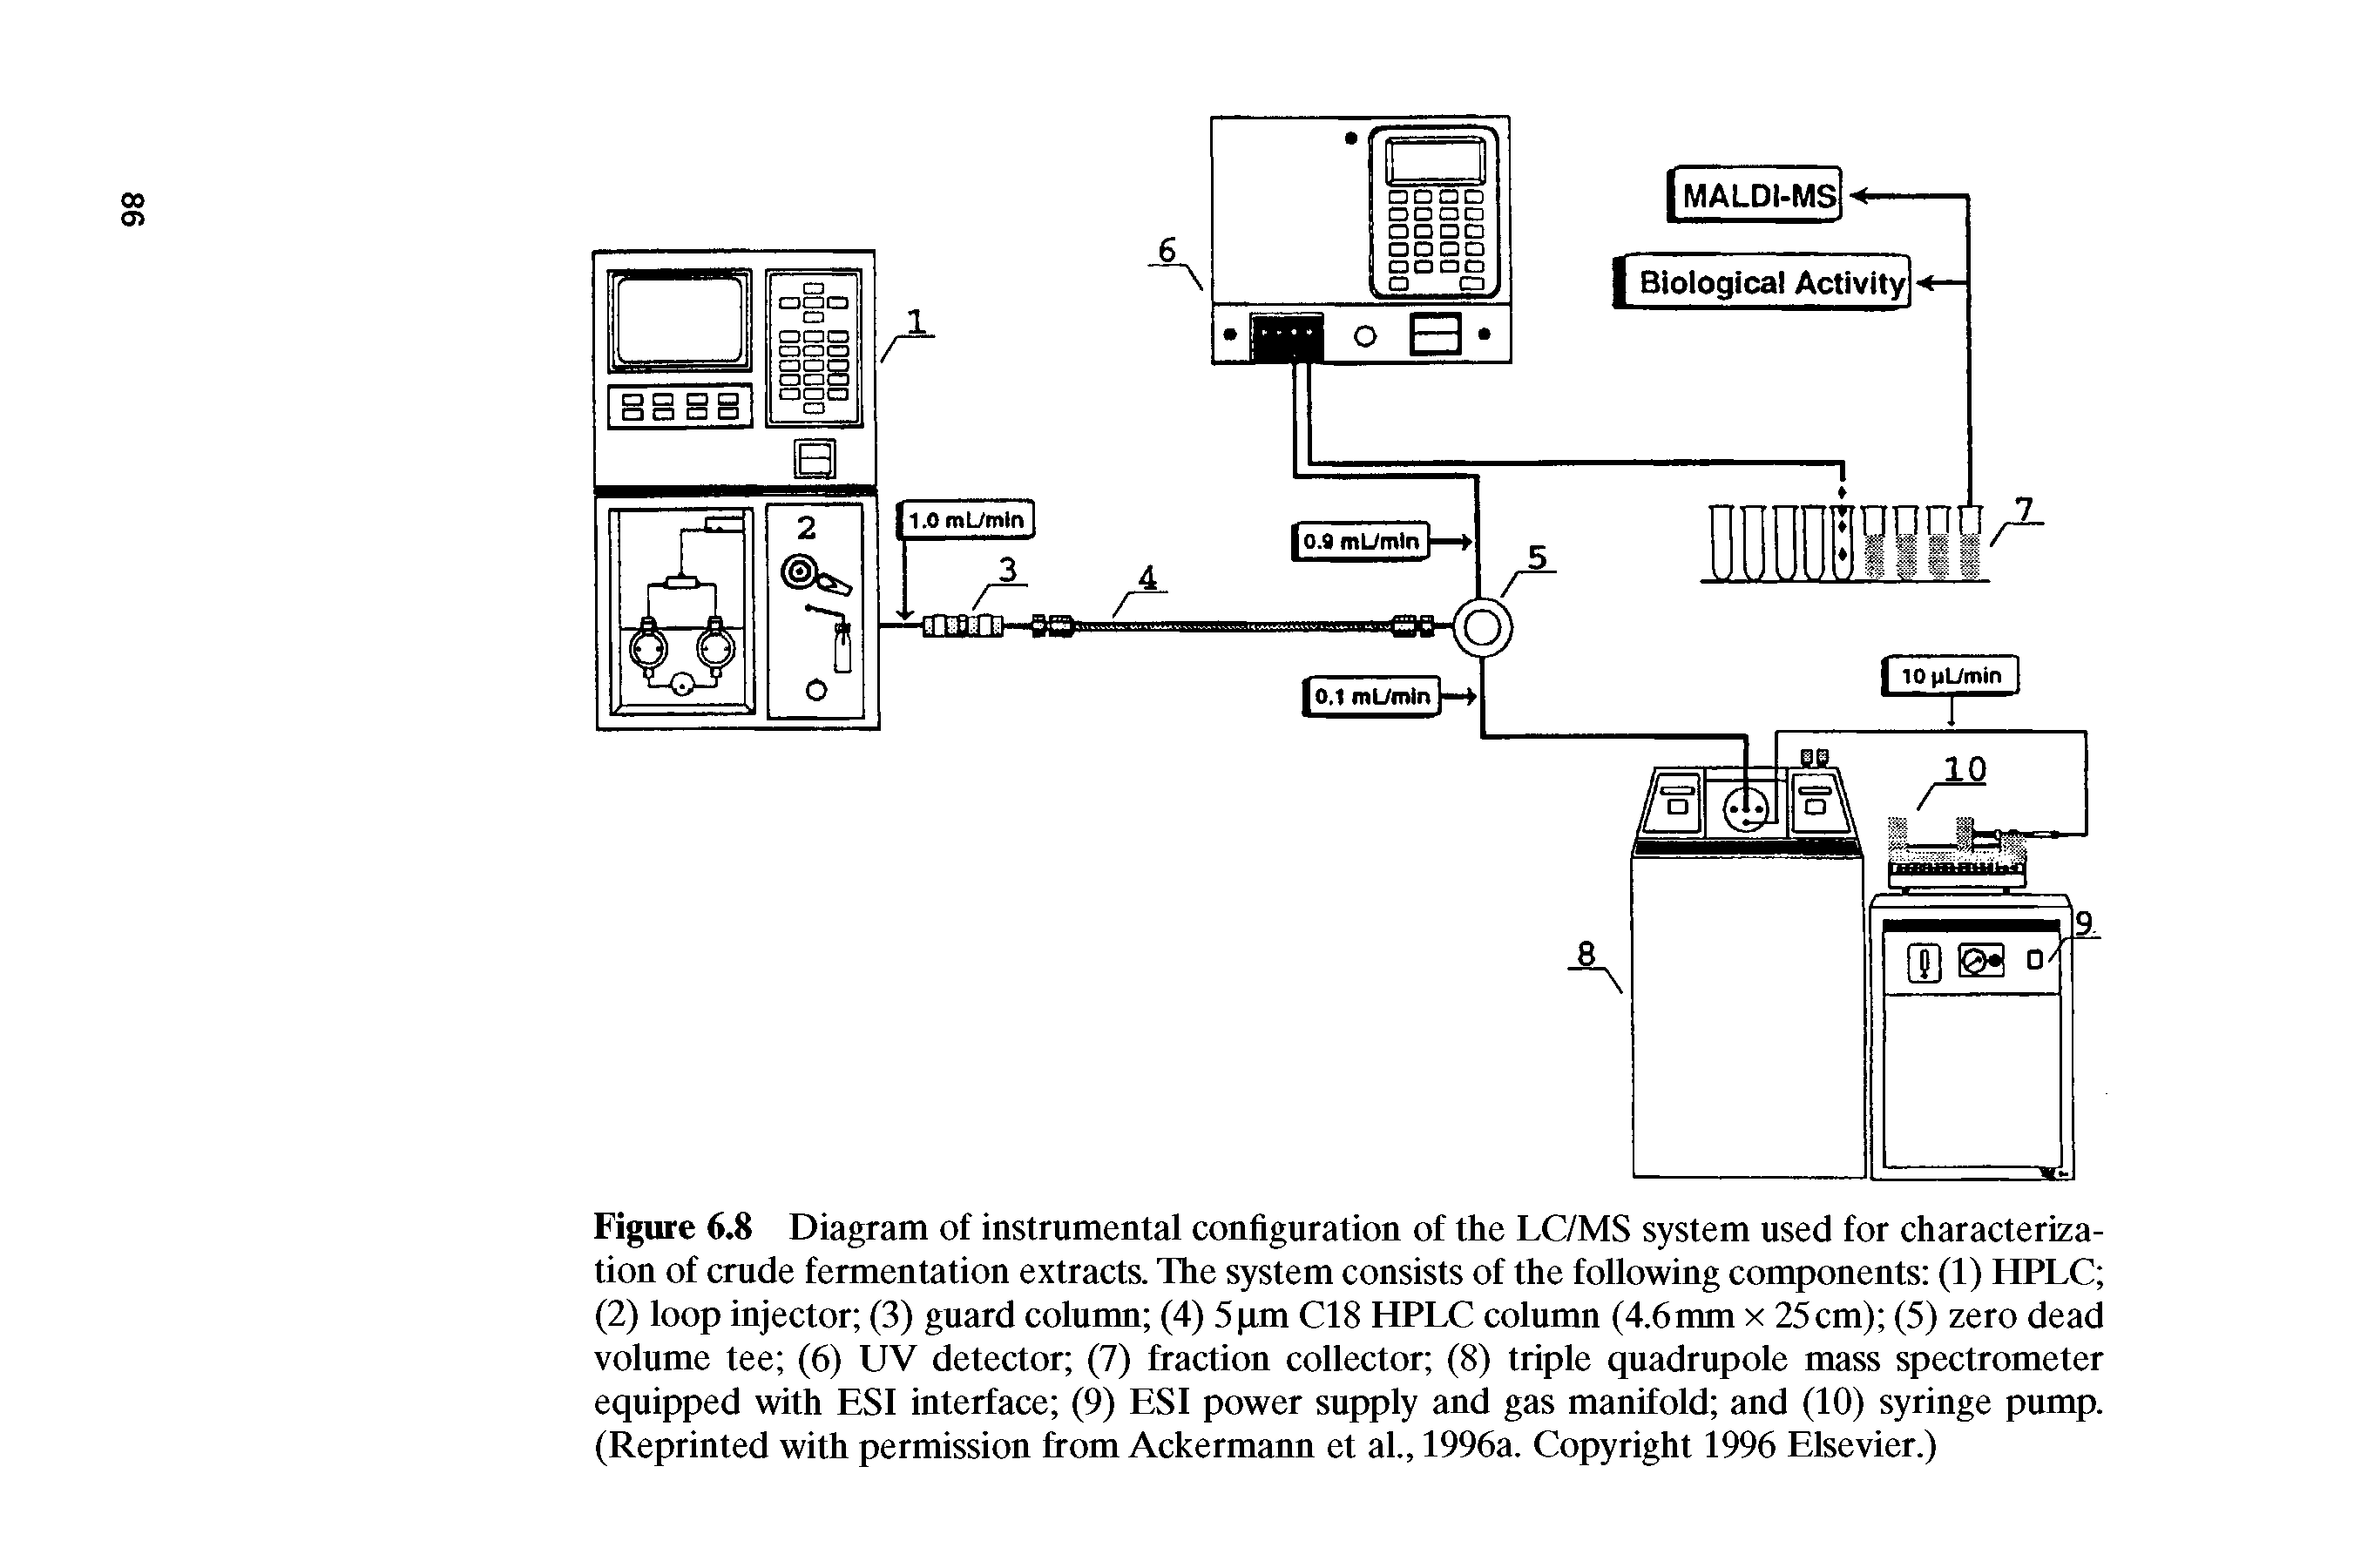 Figure 6.8 Diagram of instrumental configuration of the LC/MS system used for characterization of crude fermentation extracts. The system consists of the following components (1) HPLC (2) loop injector (3) guard column (4) 5pm C18 HPLC column (4.6mm x 25cm) (5) zero dead volume tee (6) UV detector (7) fraction collector (8) triple quadrupole mass spectrometer equipped with ESI interface (9) ESI power supply and gas manifold and (10) syringe pump. (Reprinted with permission from Ackermann et al., 1996a. Copyright 1996 Elsevier.)...